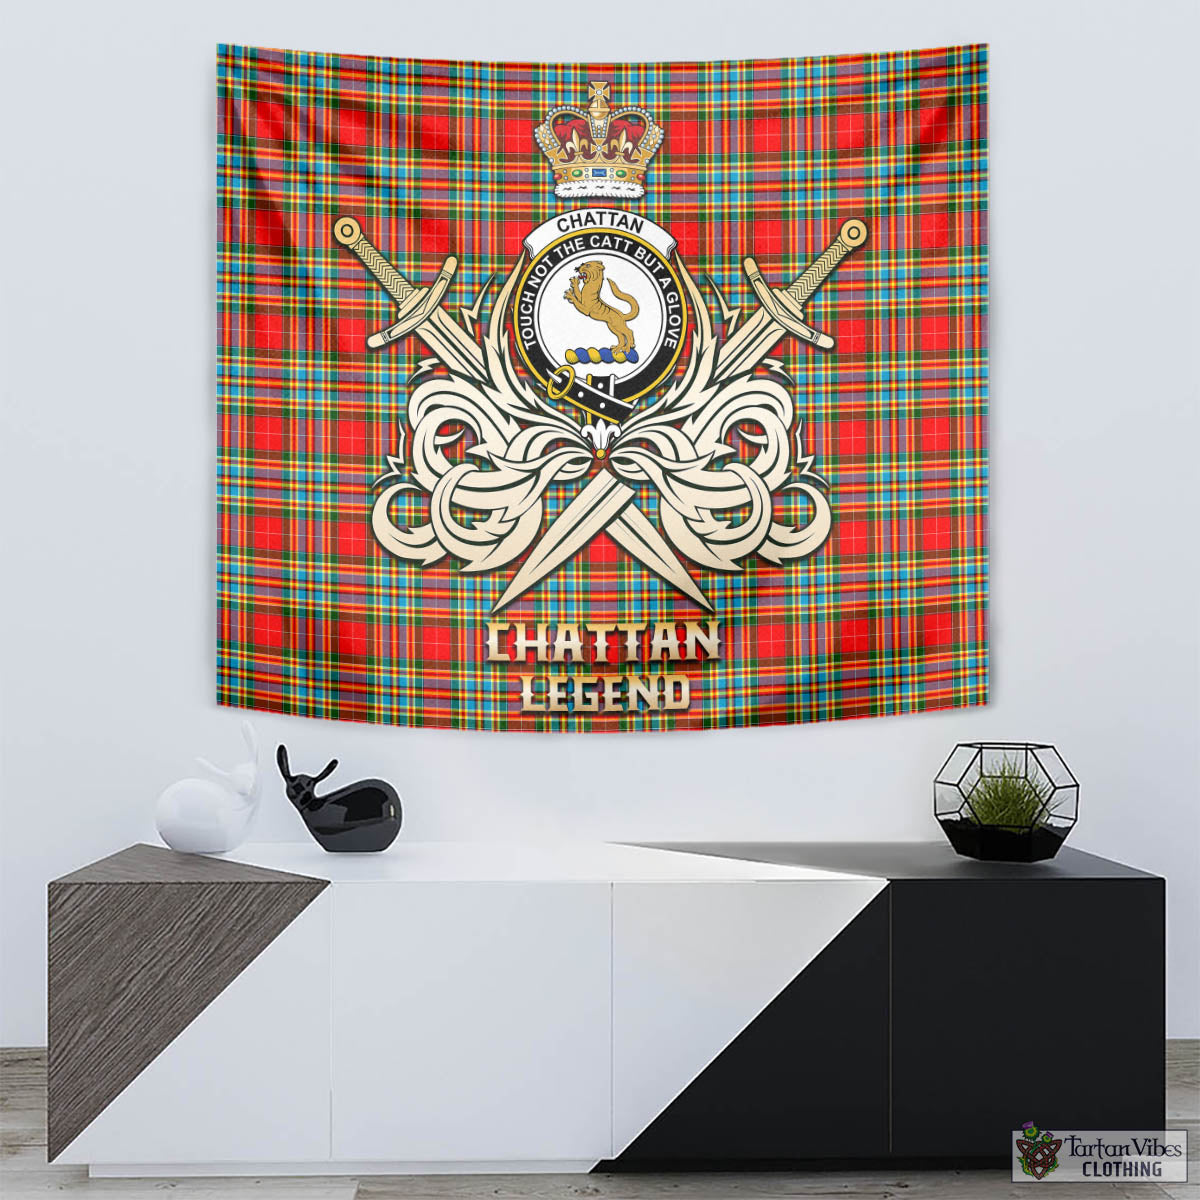 Tartan Vibes Clothing Chattan Tartan Tapestry with Clan Crest and the Golden Sword of Courageous Legacy